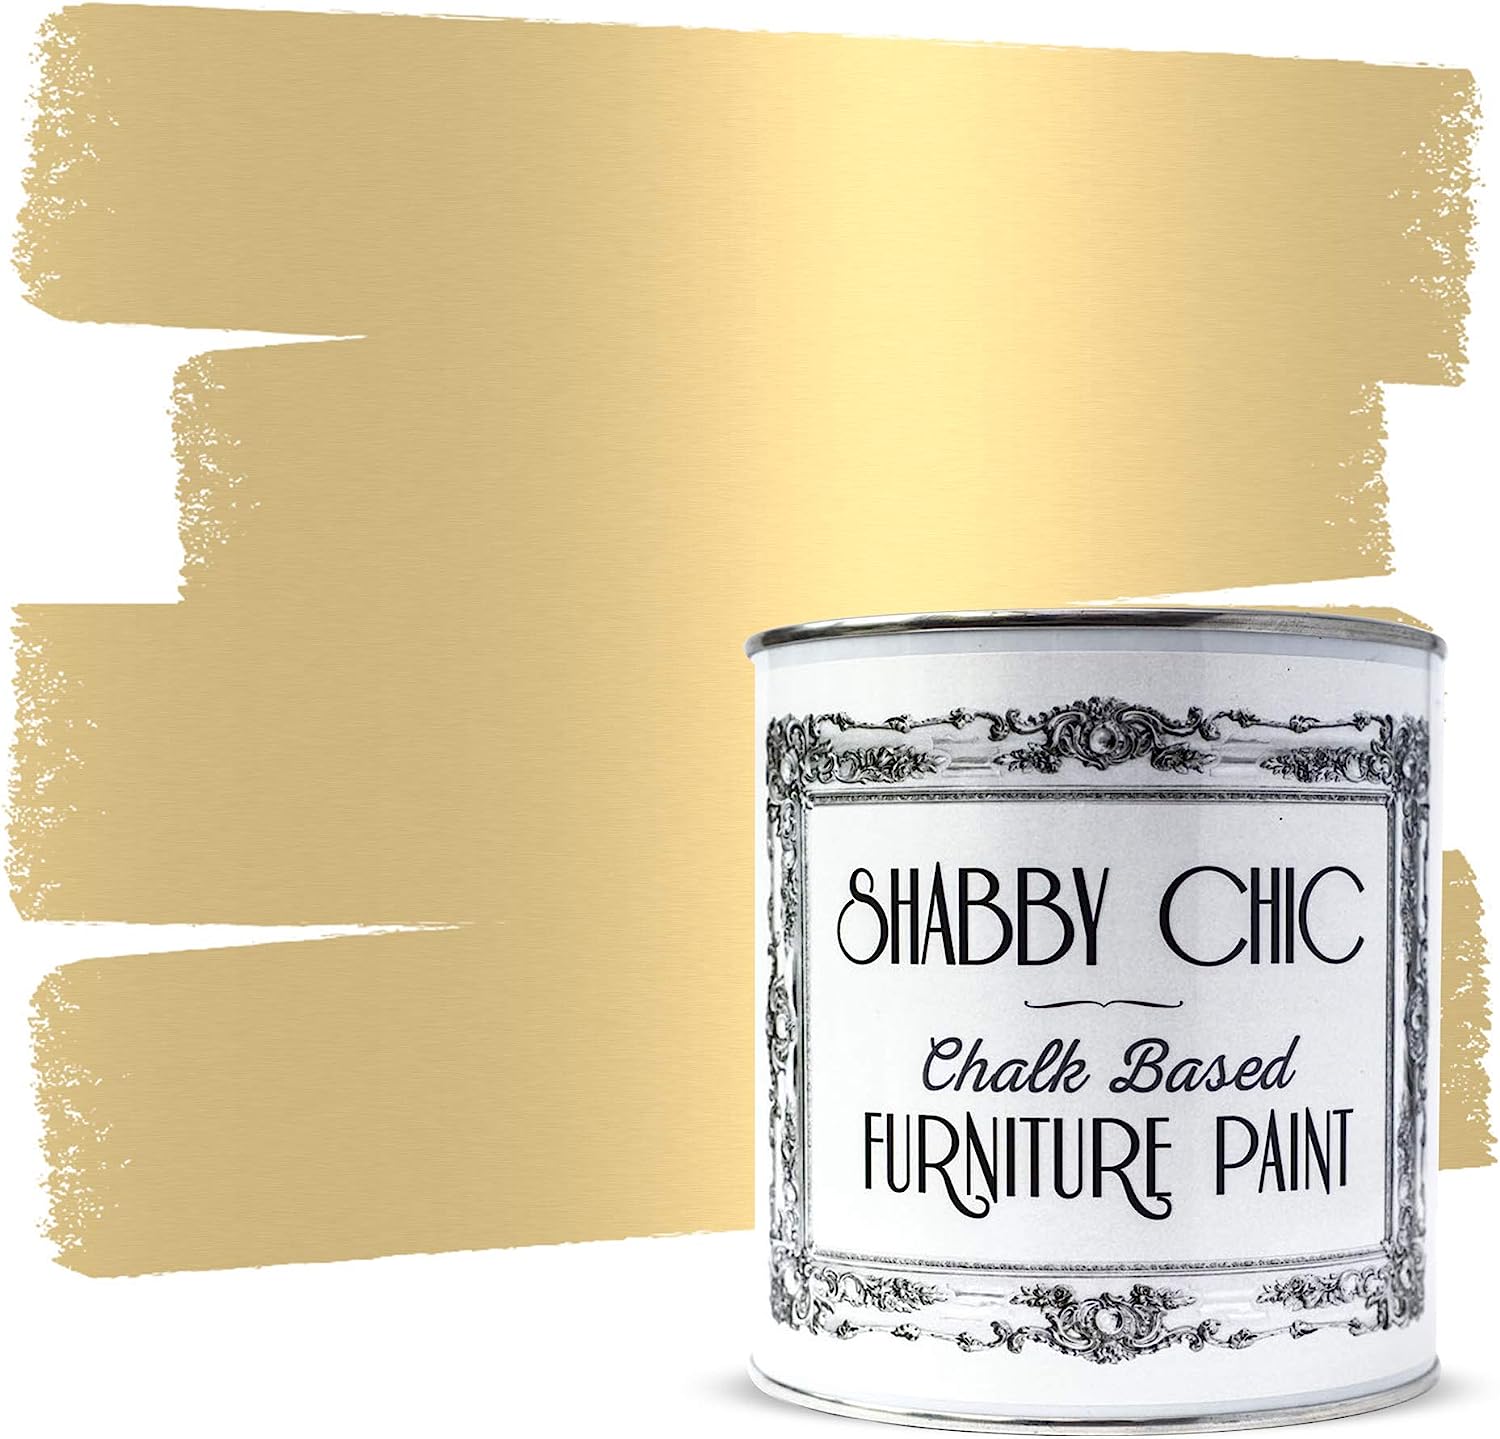 Shabby Chic Chalked Furniture Paint: Luxurious Chalk [...]